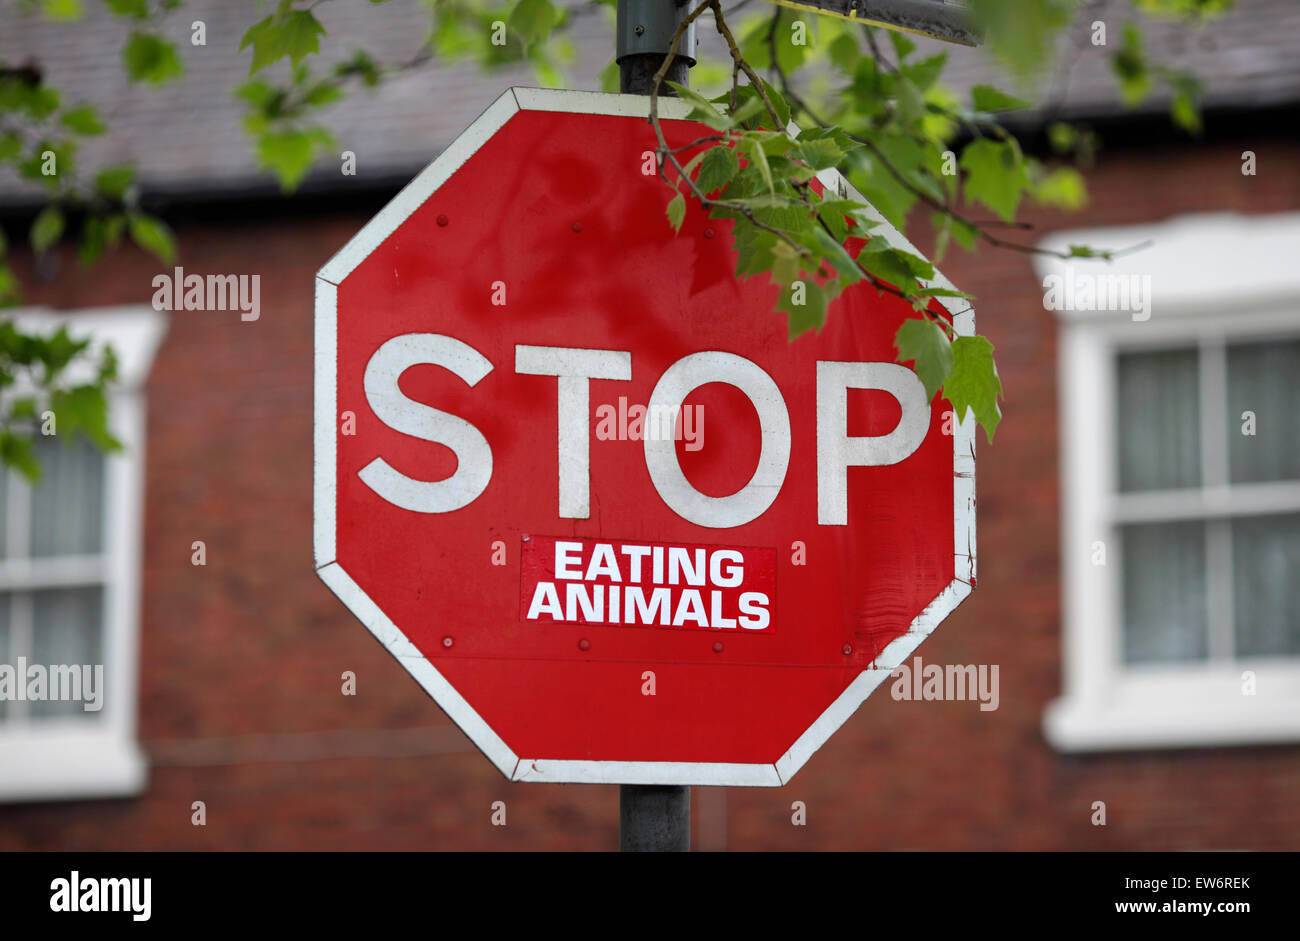 “STOP” road sign, to which someone has added “EATING ANIMALS”, Melbourne, Derbyshire. Stock Photo